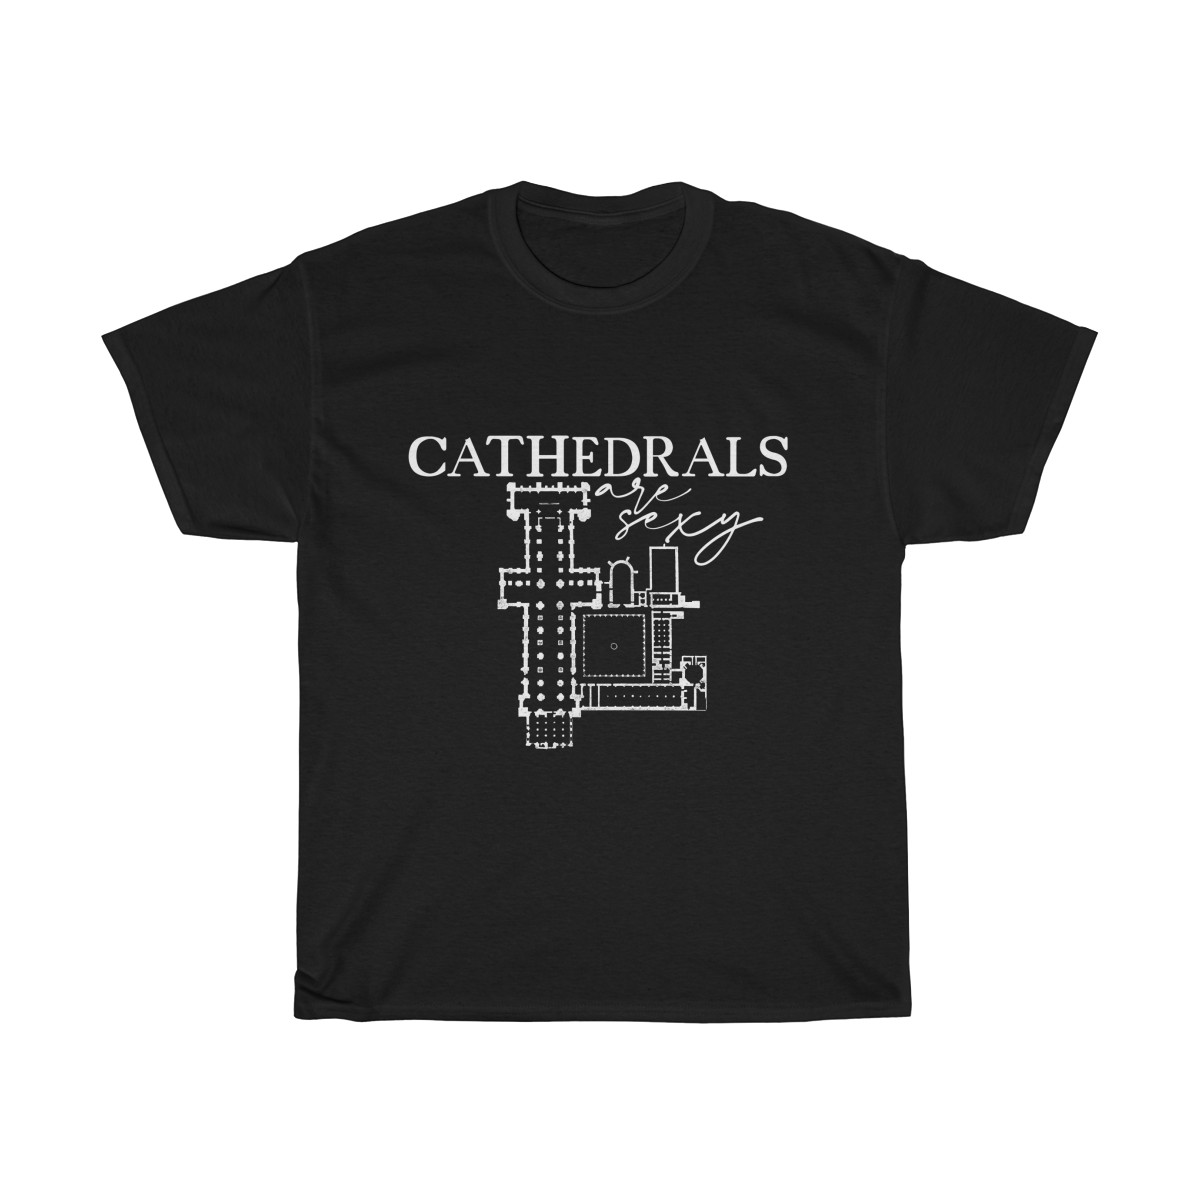 Jay Hulme On Twitter I Made A Version Of The Cathedrals Are